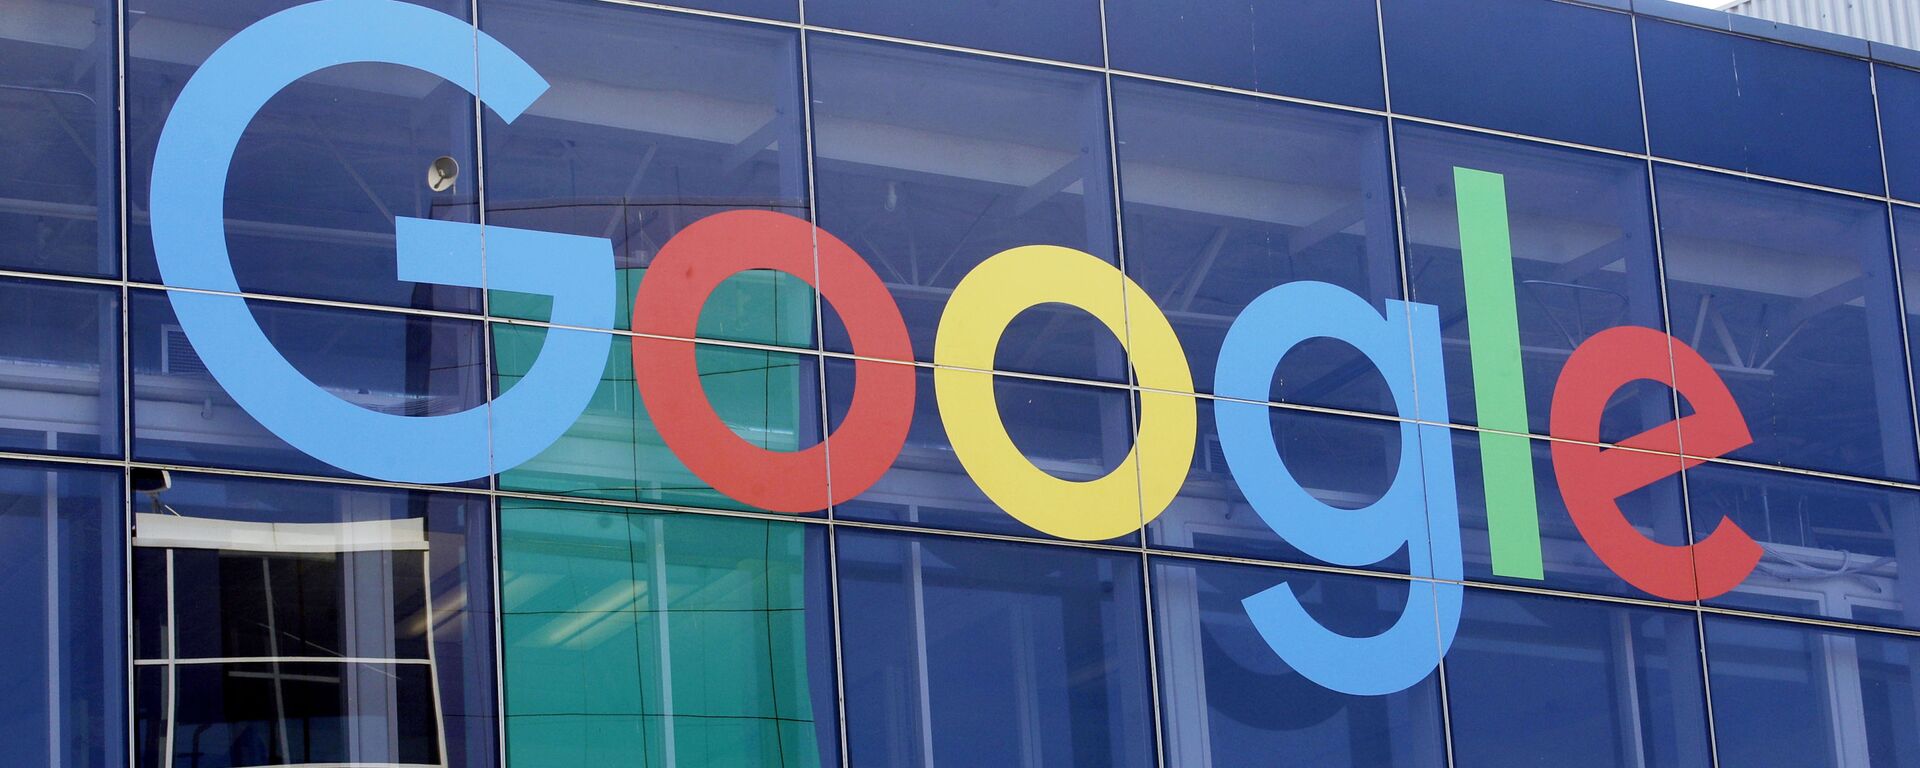 In this Sept. 24, 2019, file photo a sign is shown on a Google building at their campus in Mountain View, Calif. Google is formally pushing back on antitrust claims brought against it by the Justice Department two months ago. - Sputnik International, 1920, 02.06.2021